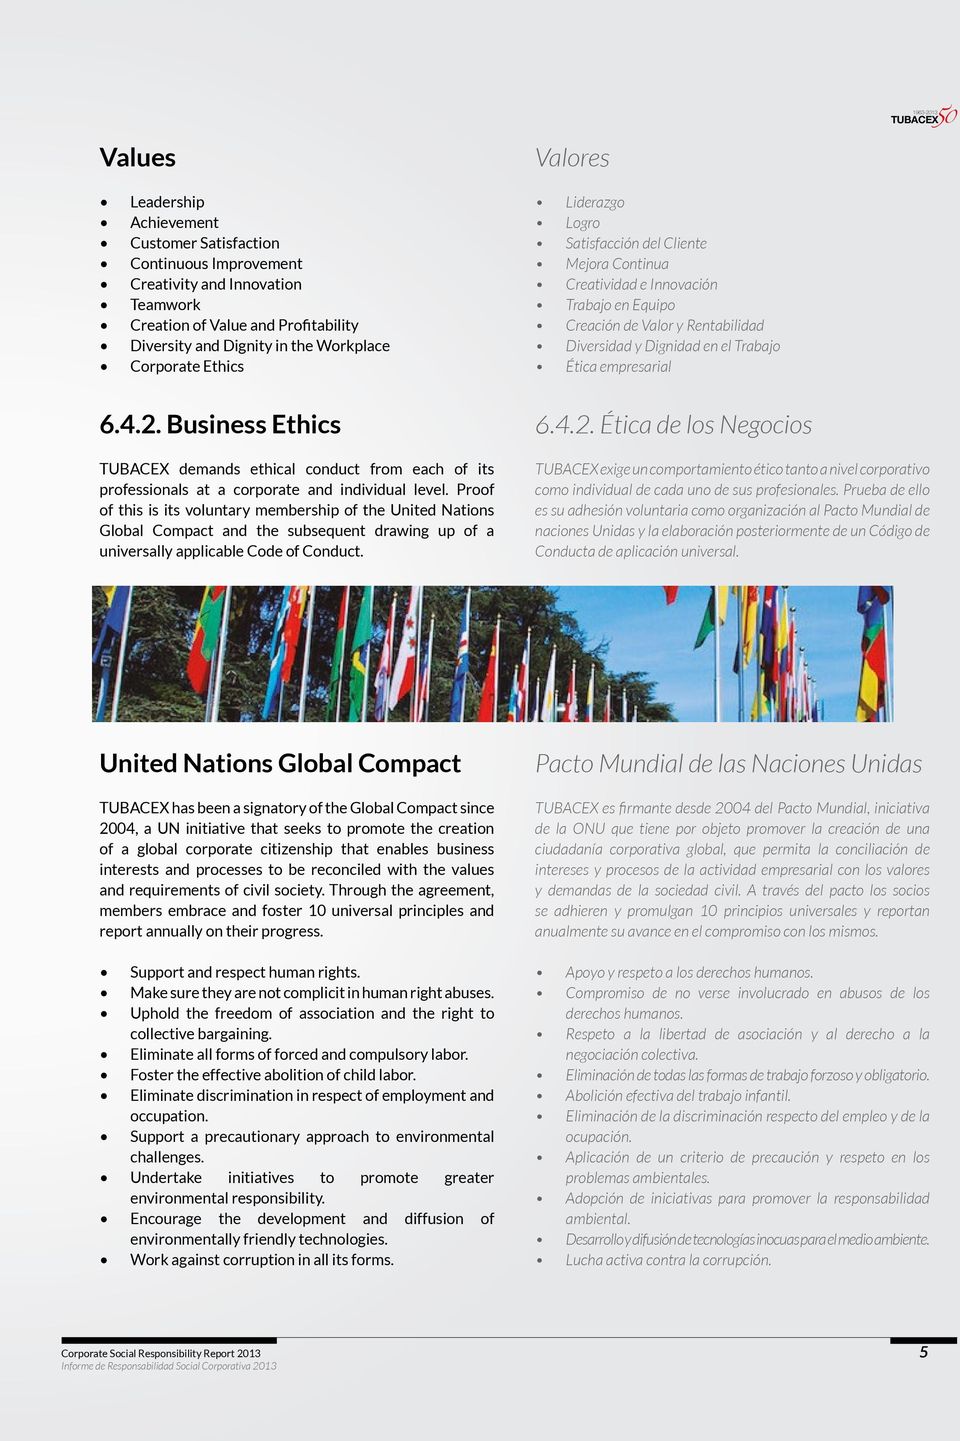 empresarial 6.4.2. Business Ethics demands ethical conduct from each of its professionals at a corporate and individual level.